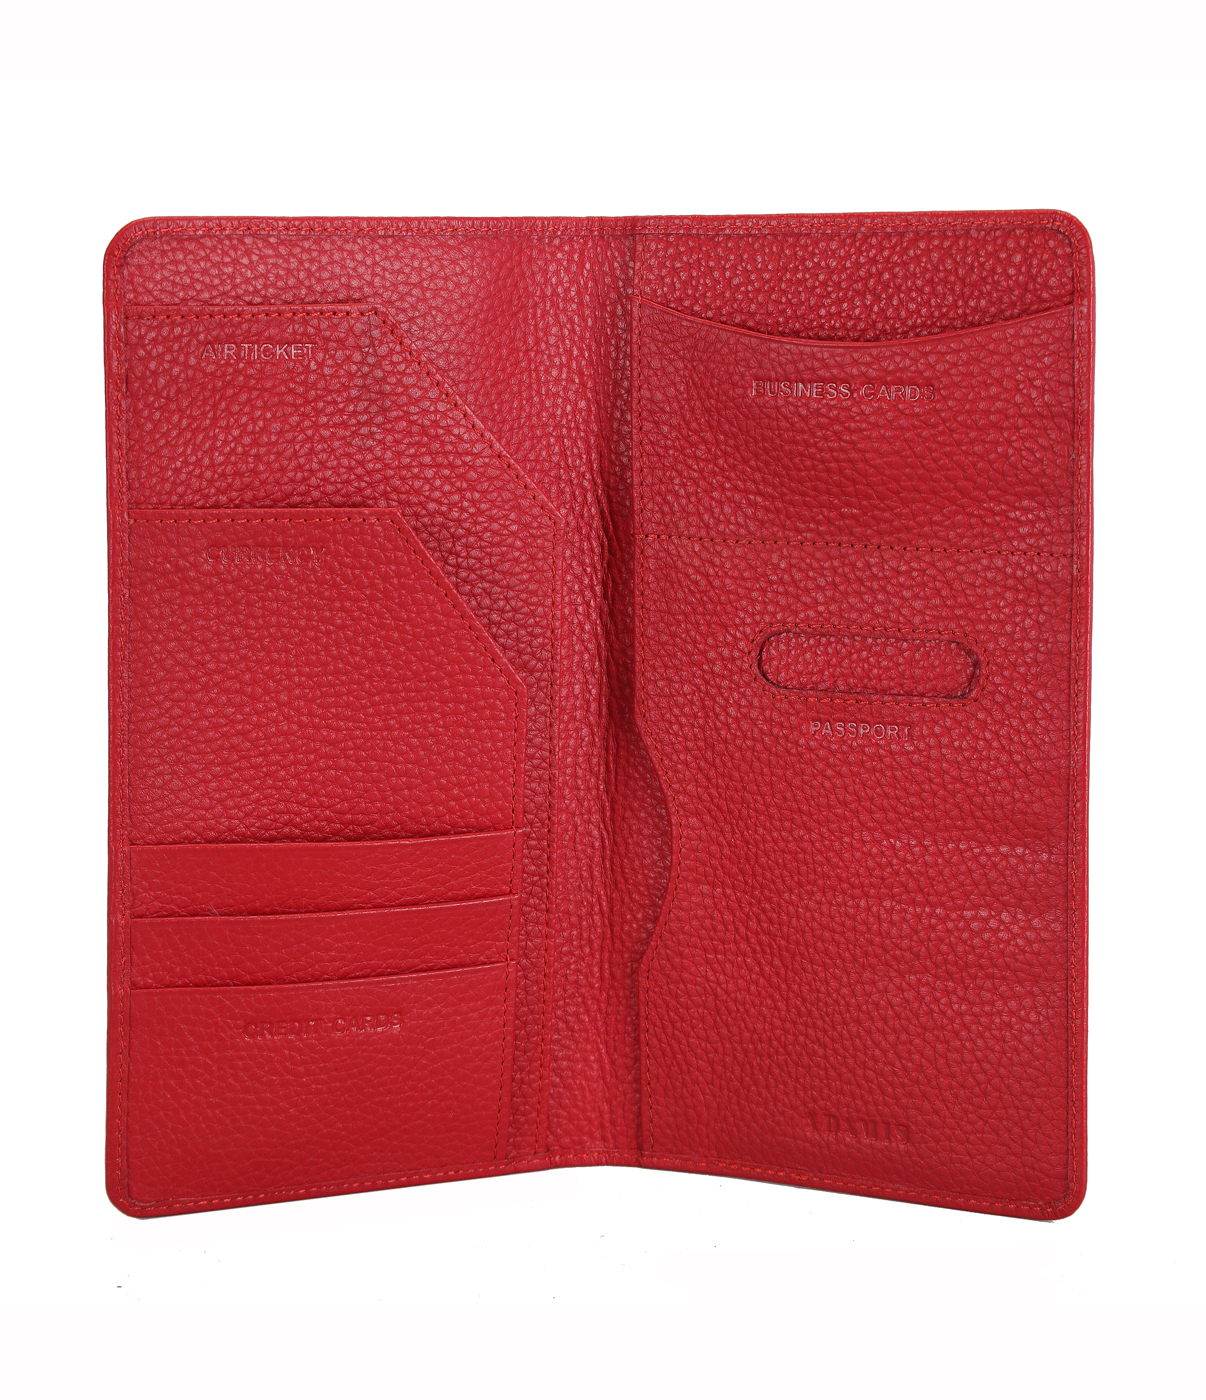 W85-Rafel-Travel document wallet in Genuine Leather - Red